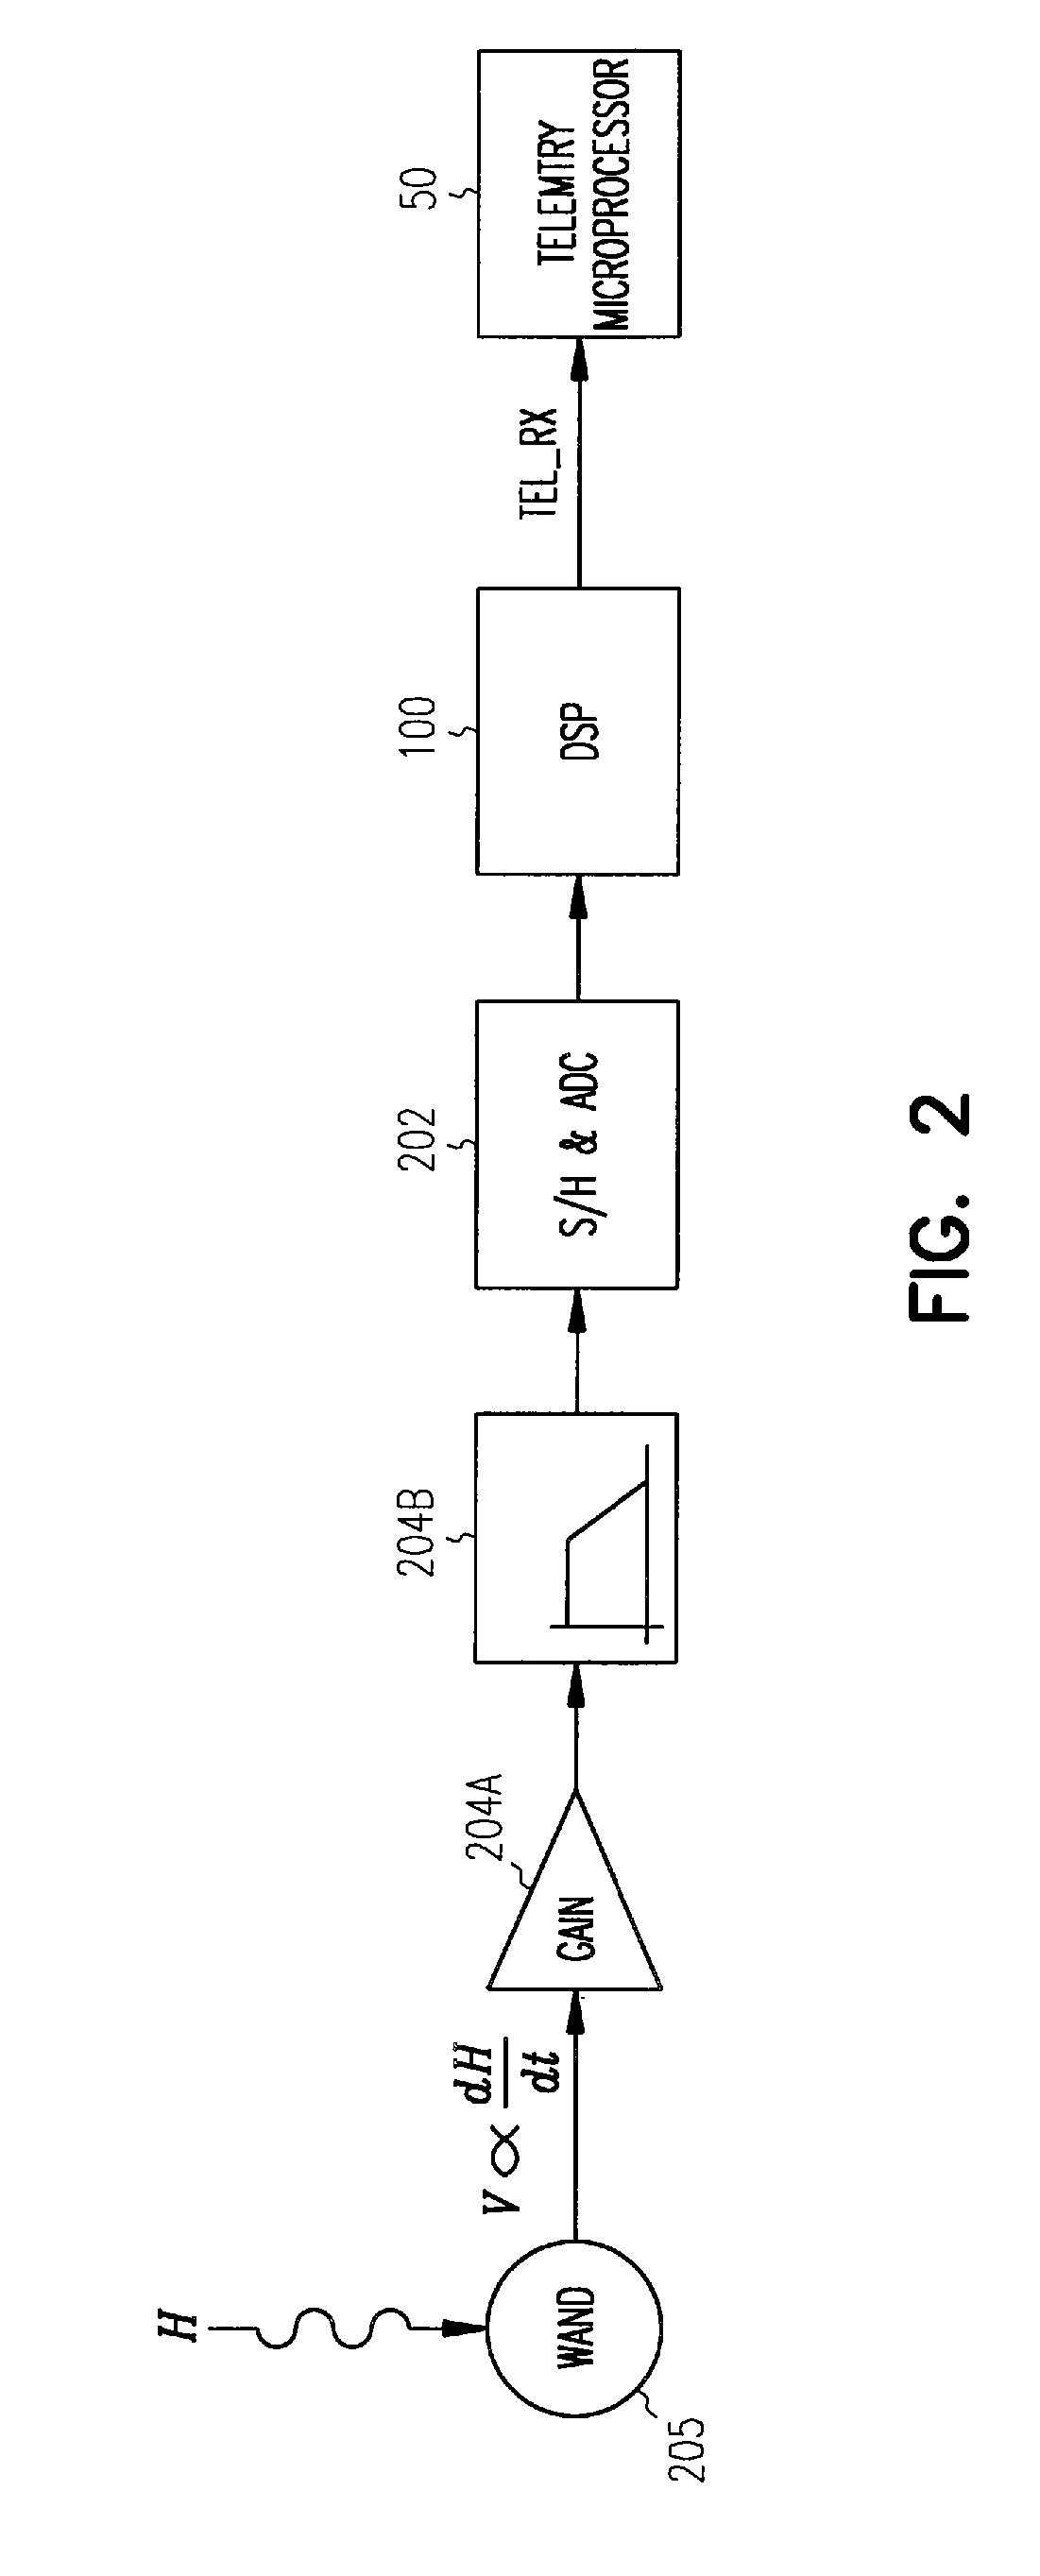 System and method for removing narrowband noise